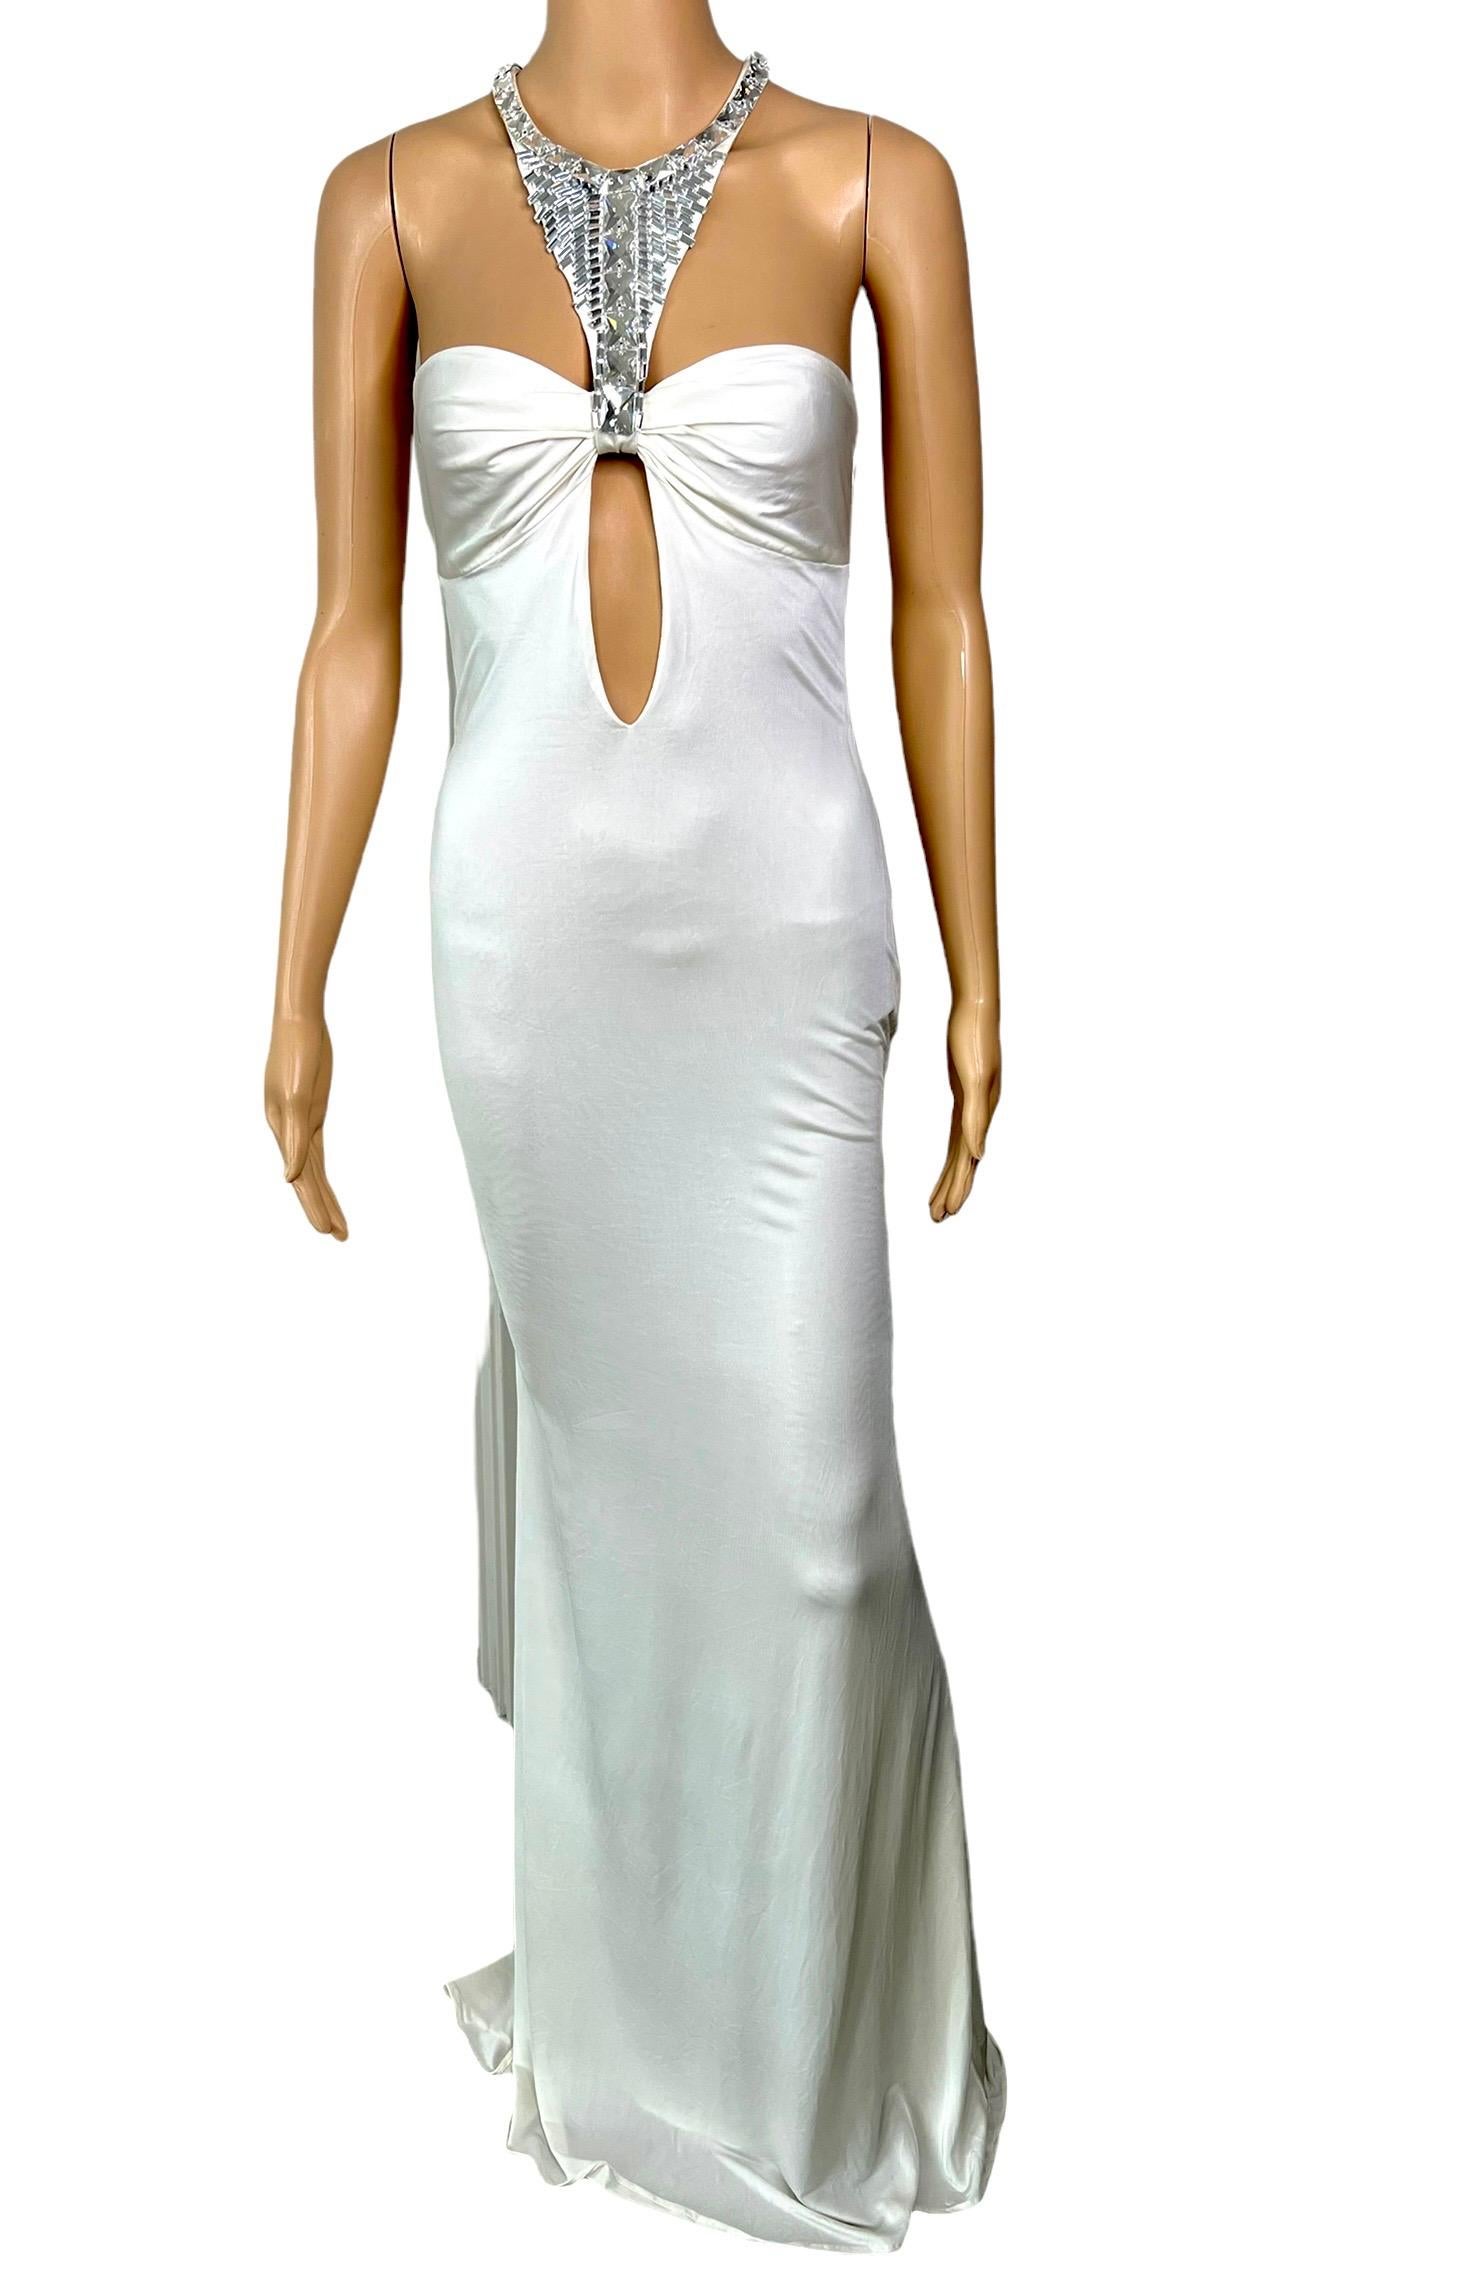 Tom Ford for Gucci F/W 2004 Embellished Plunging Cutout Ivory Evening Dress Gown For Sale 5